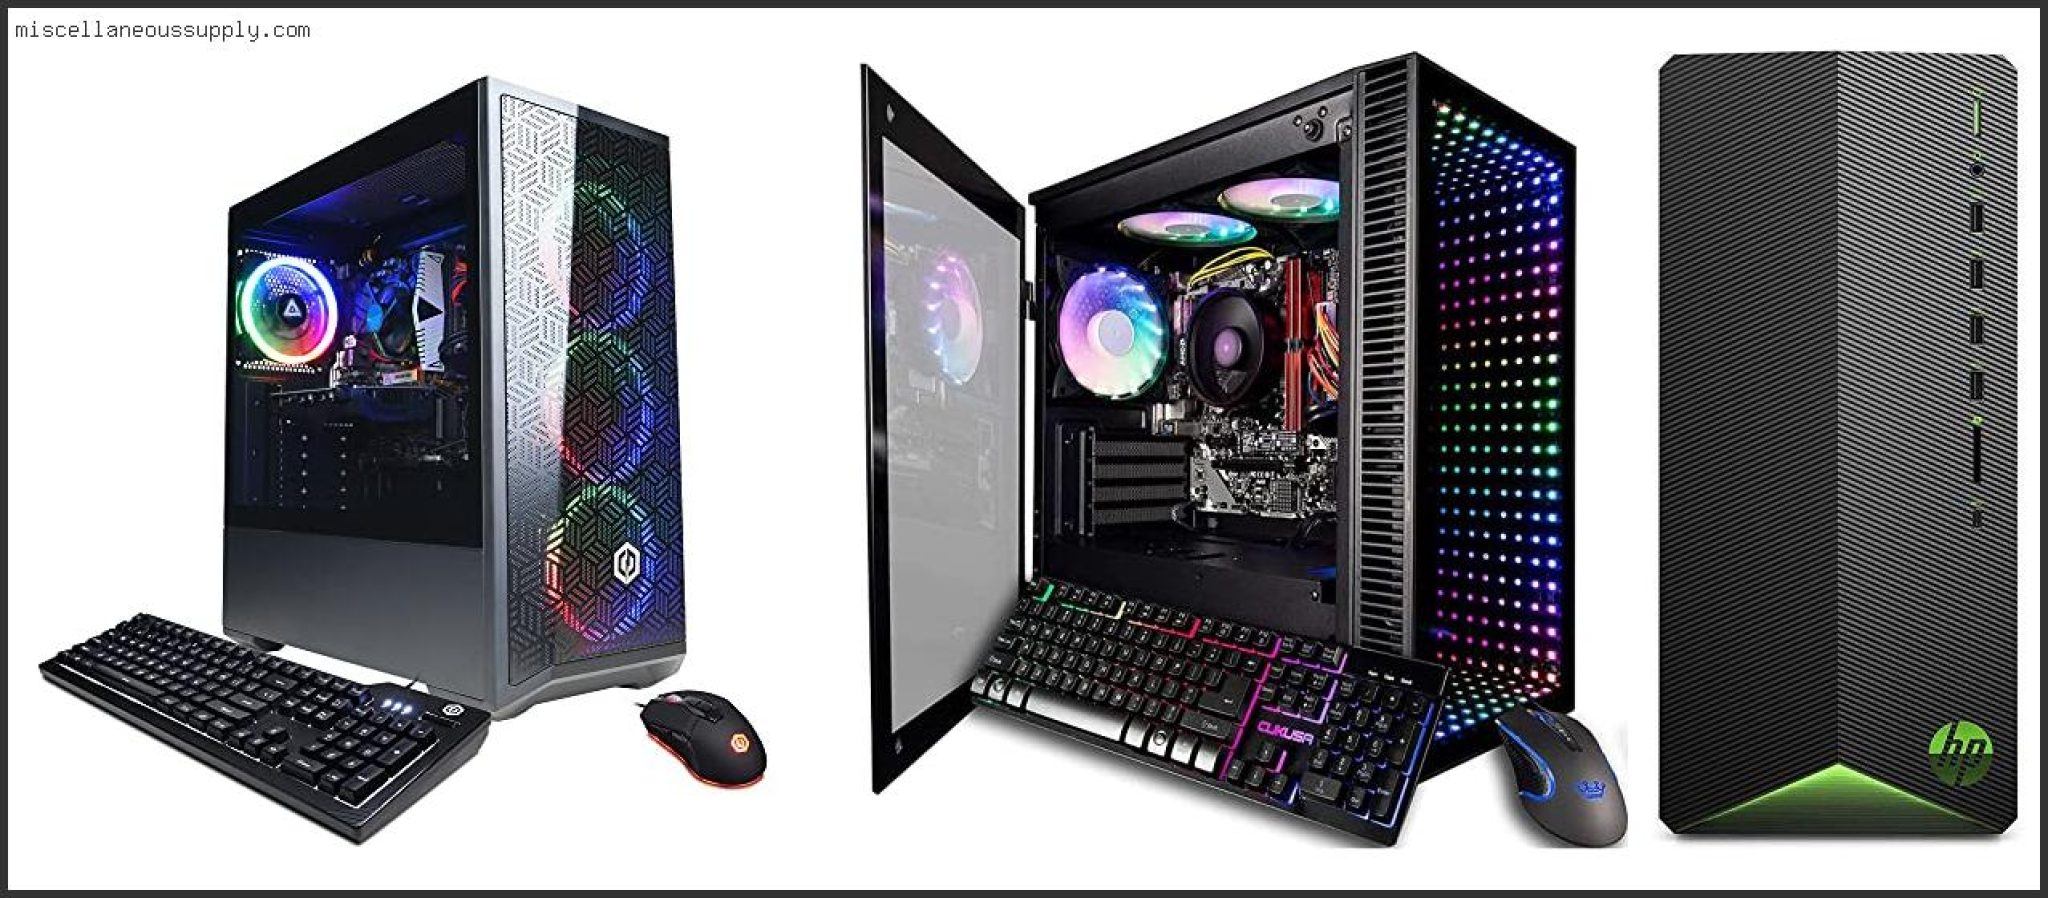 Top 10 Best Gaming Pc 800 Dollars Reviews For You Miscellaneous Supply